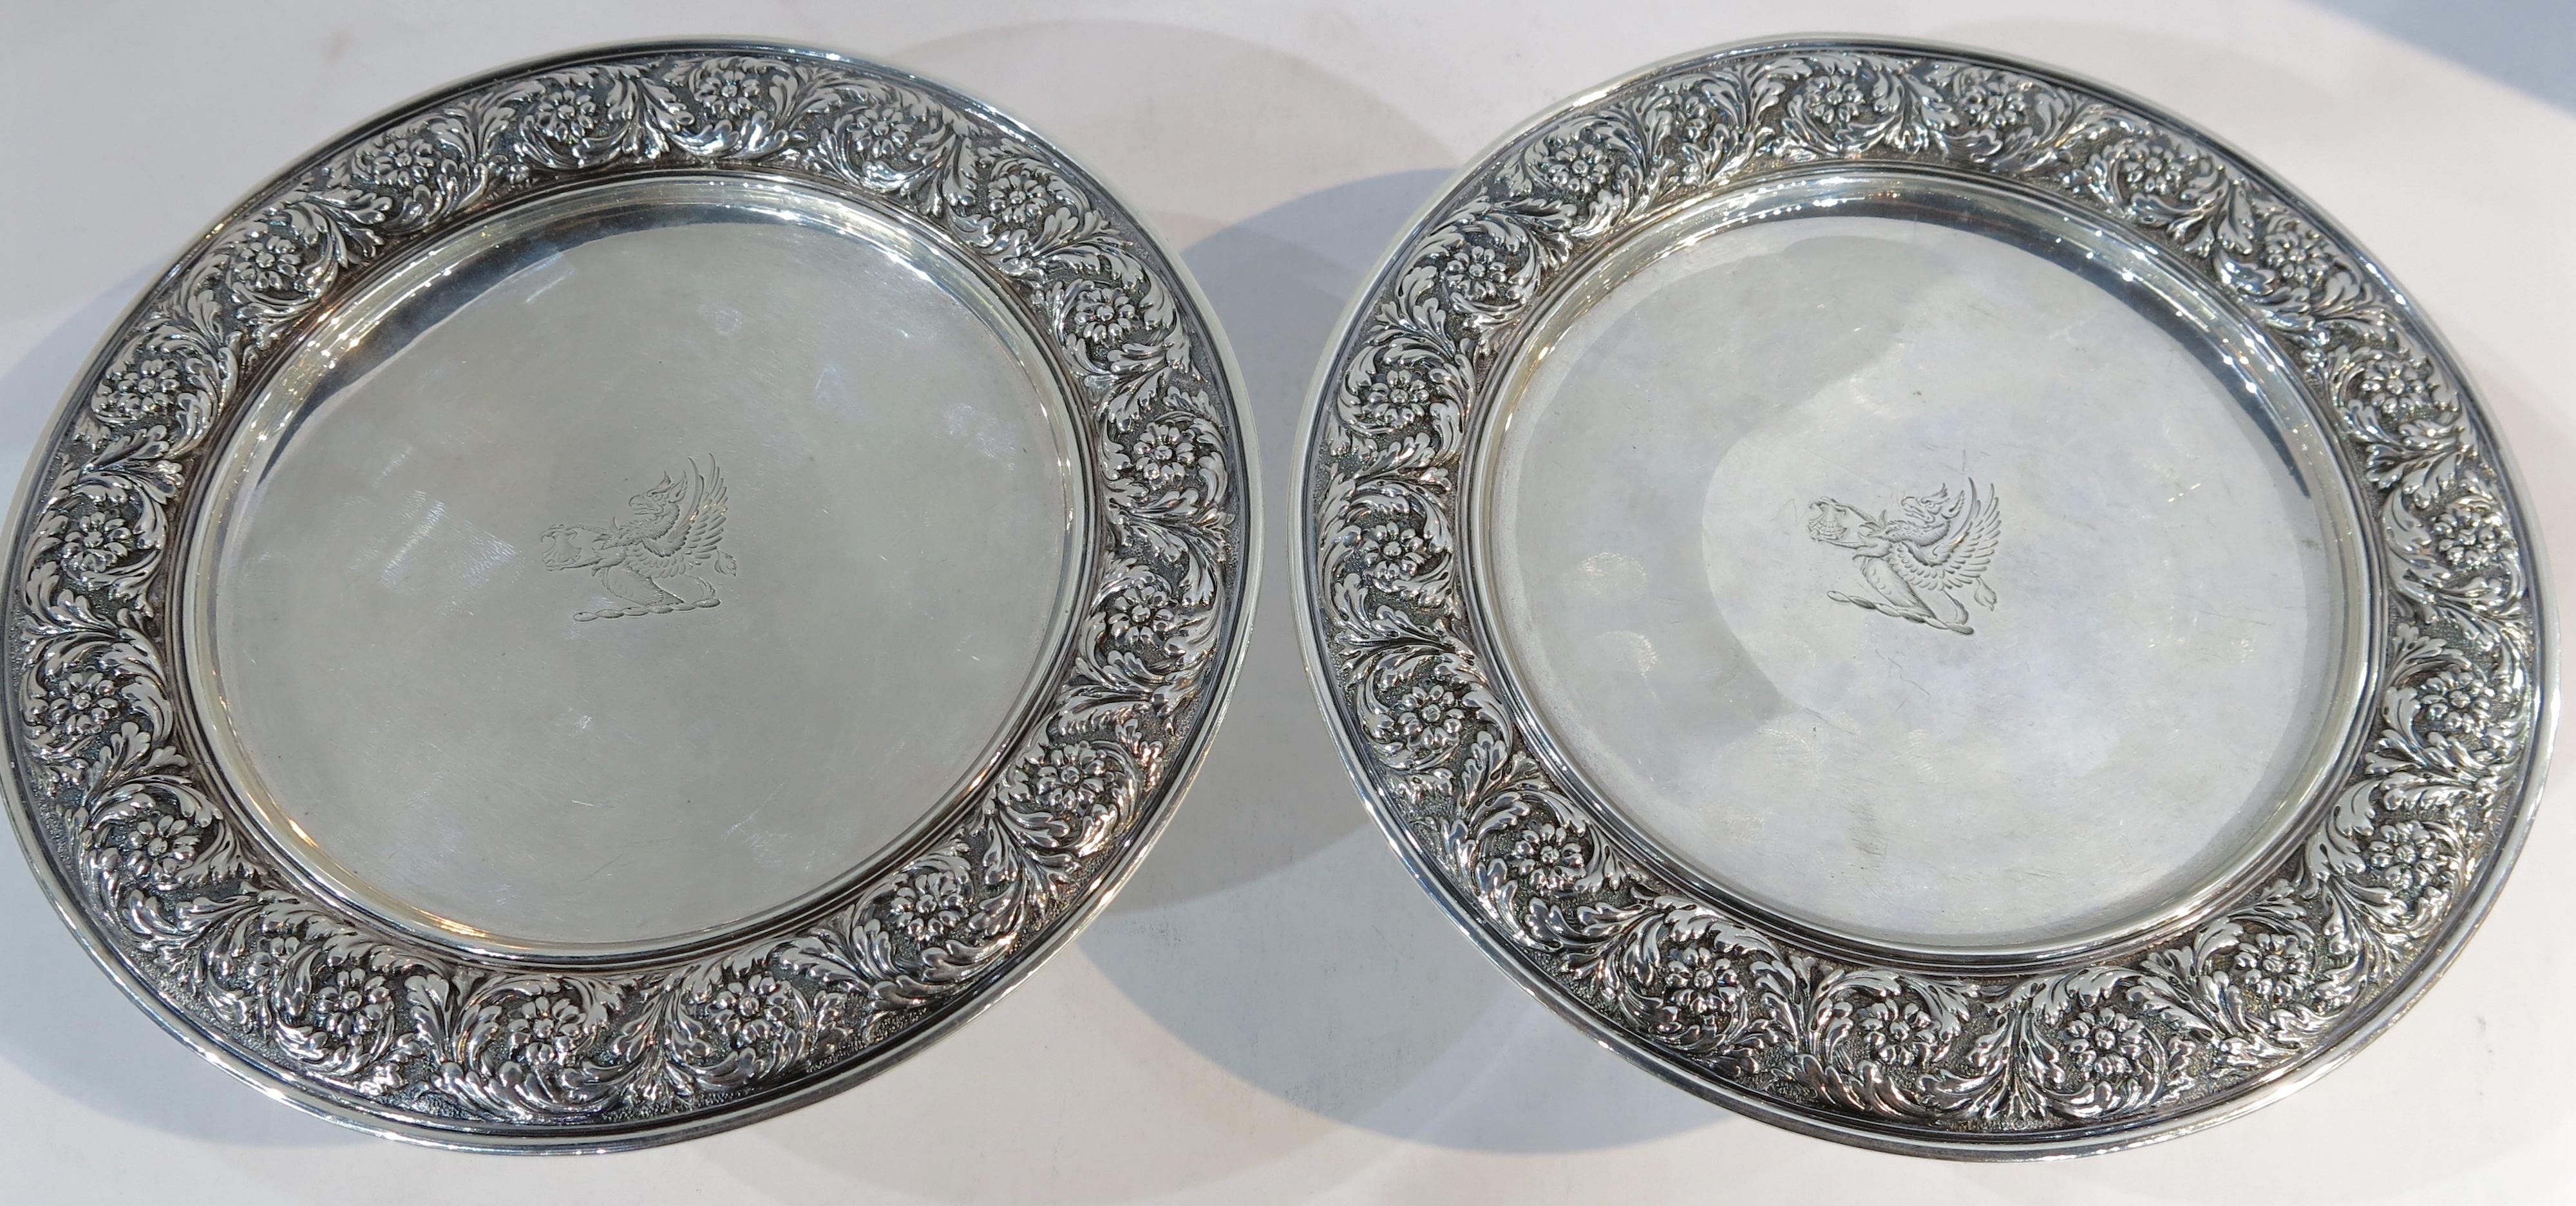 Tiffany Sterling Silver Antique Pair of Taza / Pedestal Dishes For Sale 2